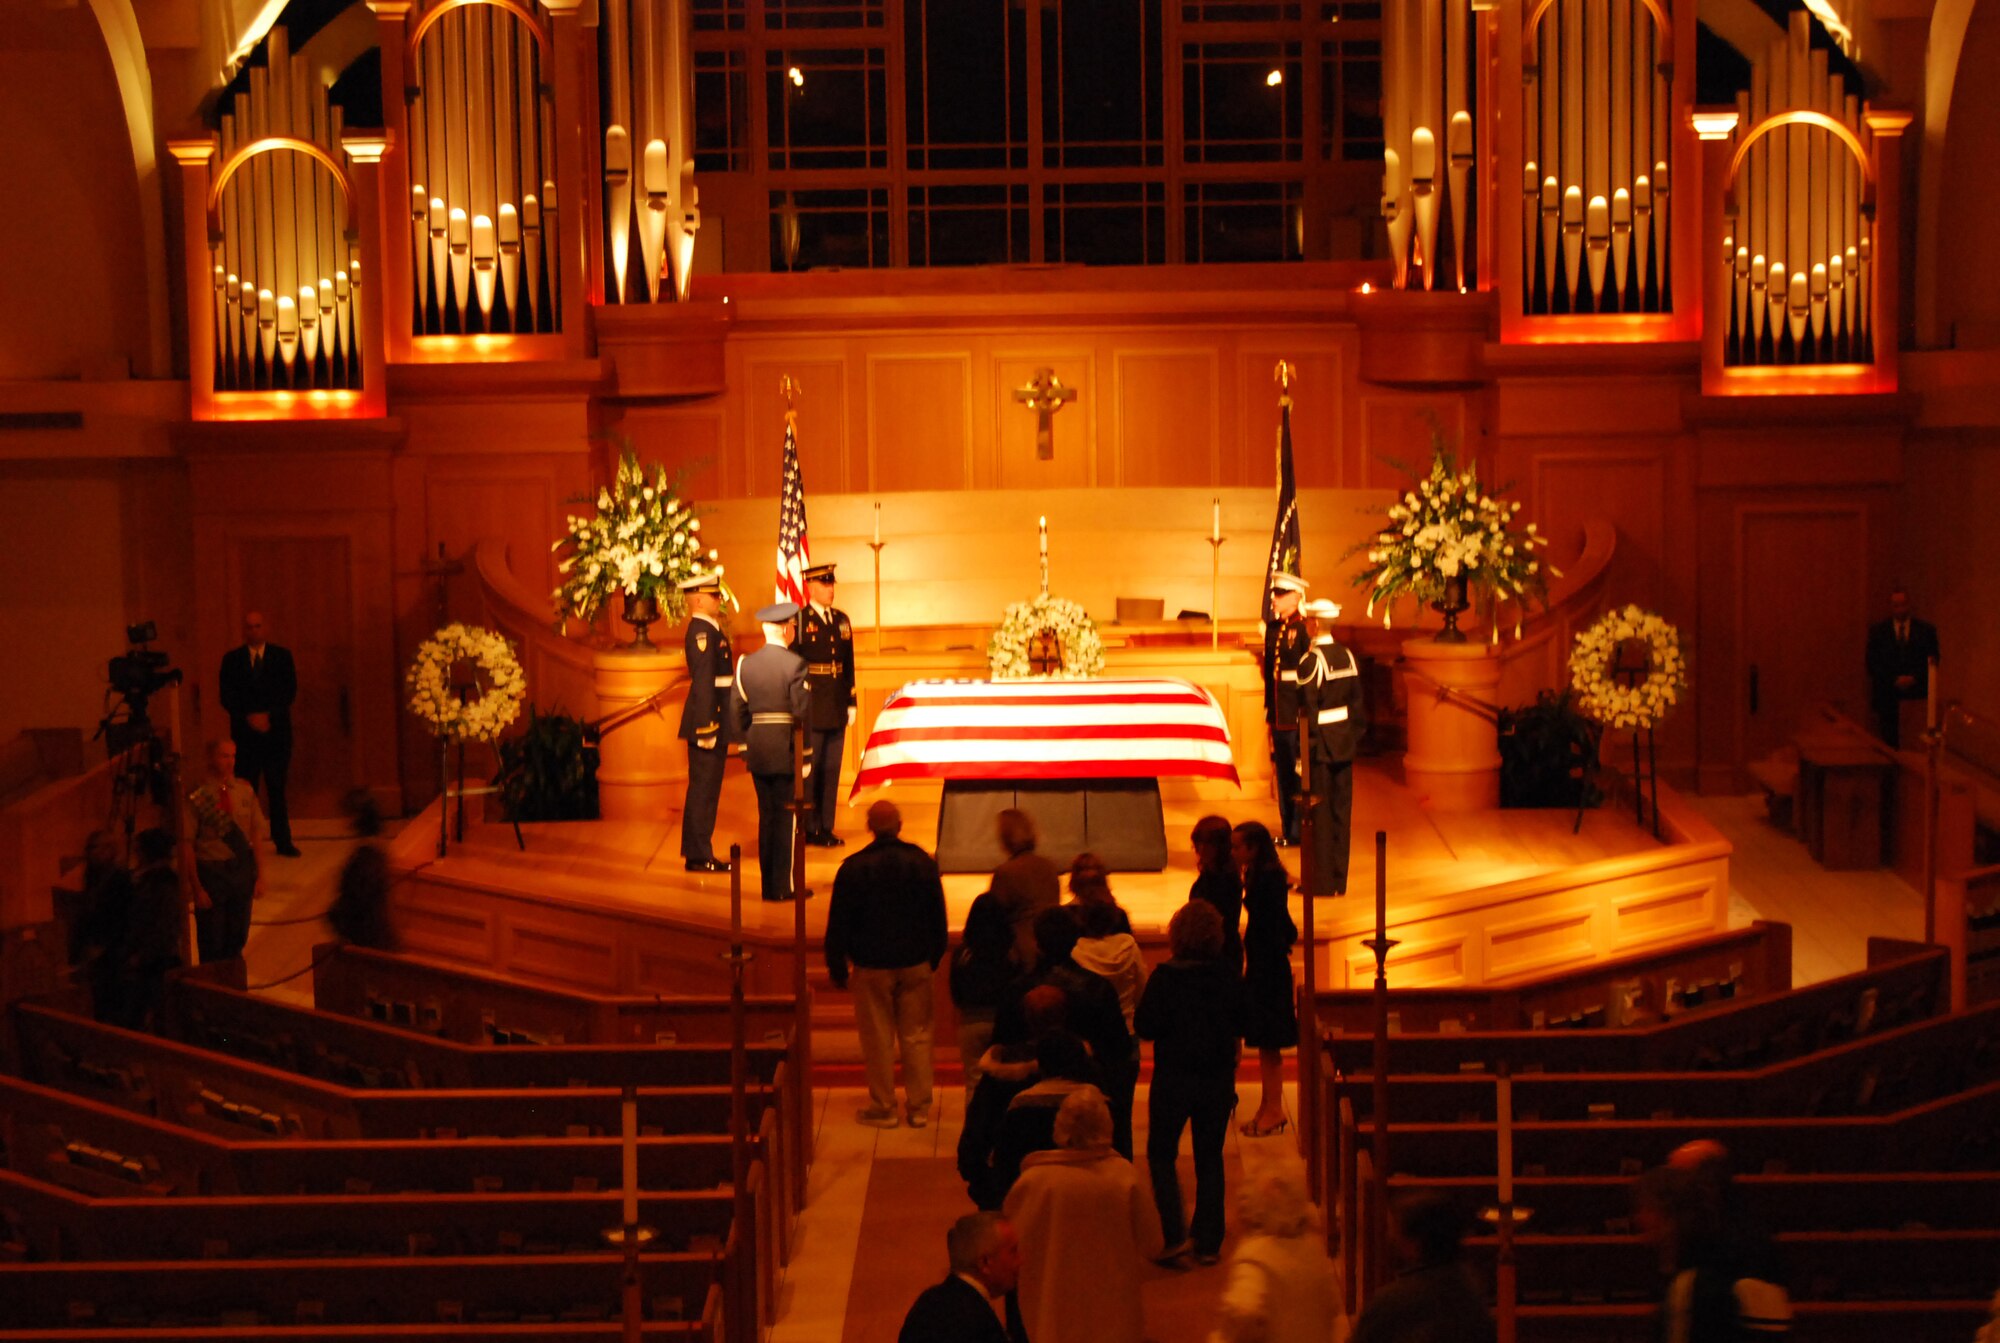 Former President Gerald R. Ford lies in repose at St. Margaret's Episcopal Church in Palm Desert, California, as the Guard of Honor stands watch. More than 500 military members are in Palm Desert supporting the California portion of the State Funeral for the former president. The military is providing ceremonial, logistics, and security support to honor and pay tribute to the former Commander-in-Chief and the Ford family. Ford died in Palm Desert, California, Dec. 26 at the age of 93. (U.S. Air Force Photo/1st Lt Carrie L. Kessler)